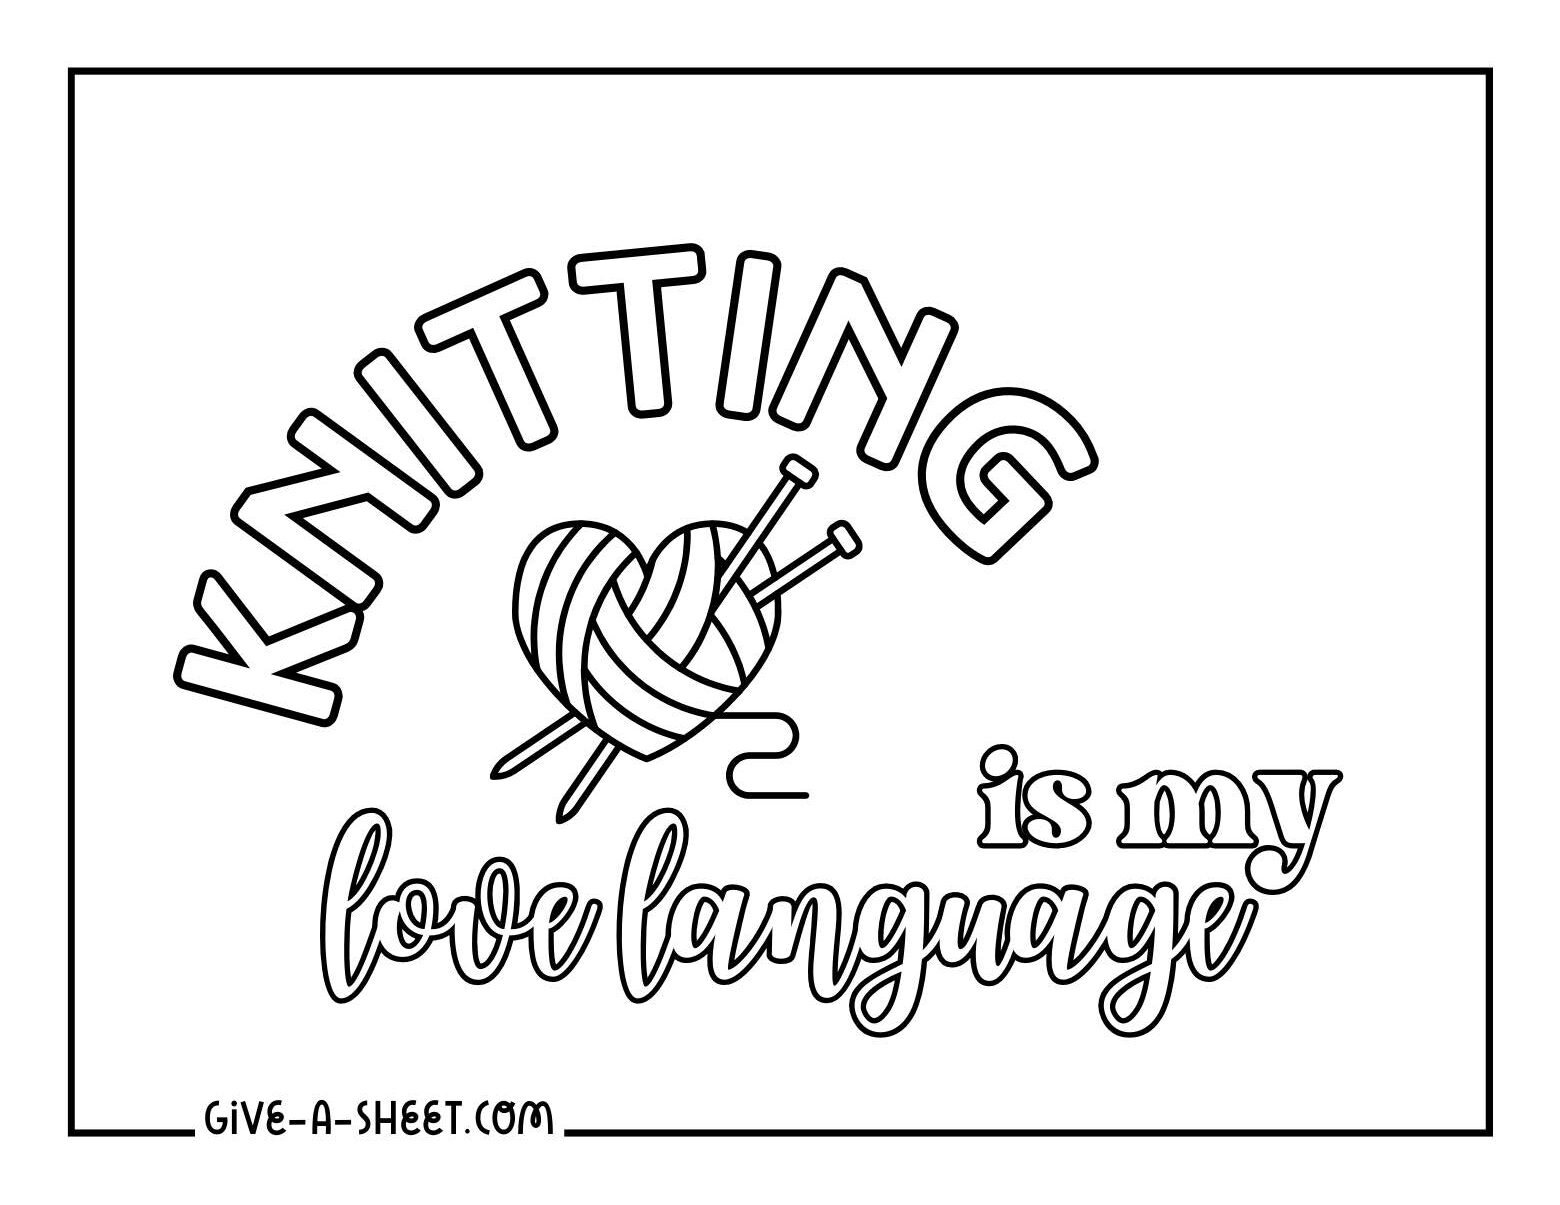 Knitting artwork coloring page for kids.